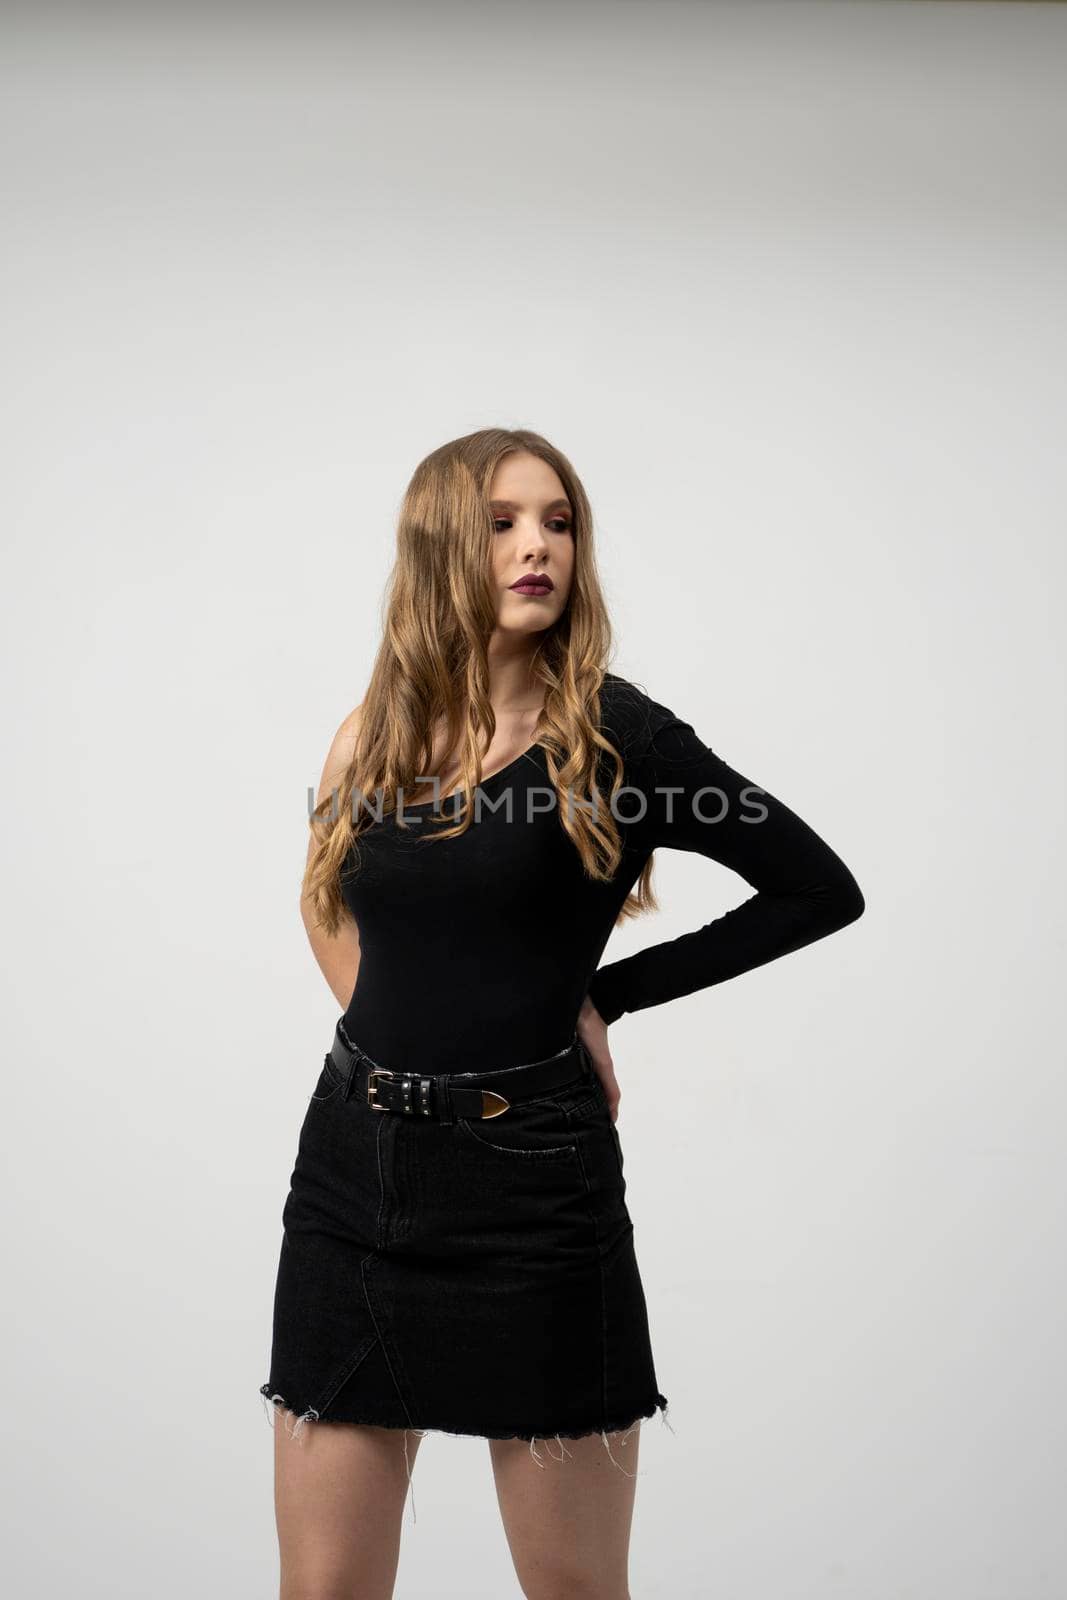 Beautiful young woman portrait in a black t-shirt and mini skirt. Studio shot, isolated on gray background. by vovsht